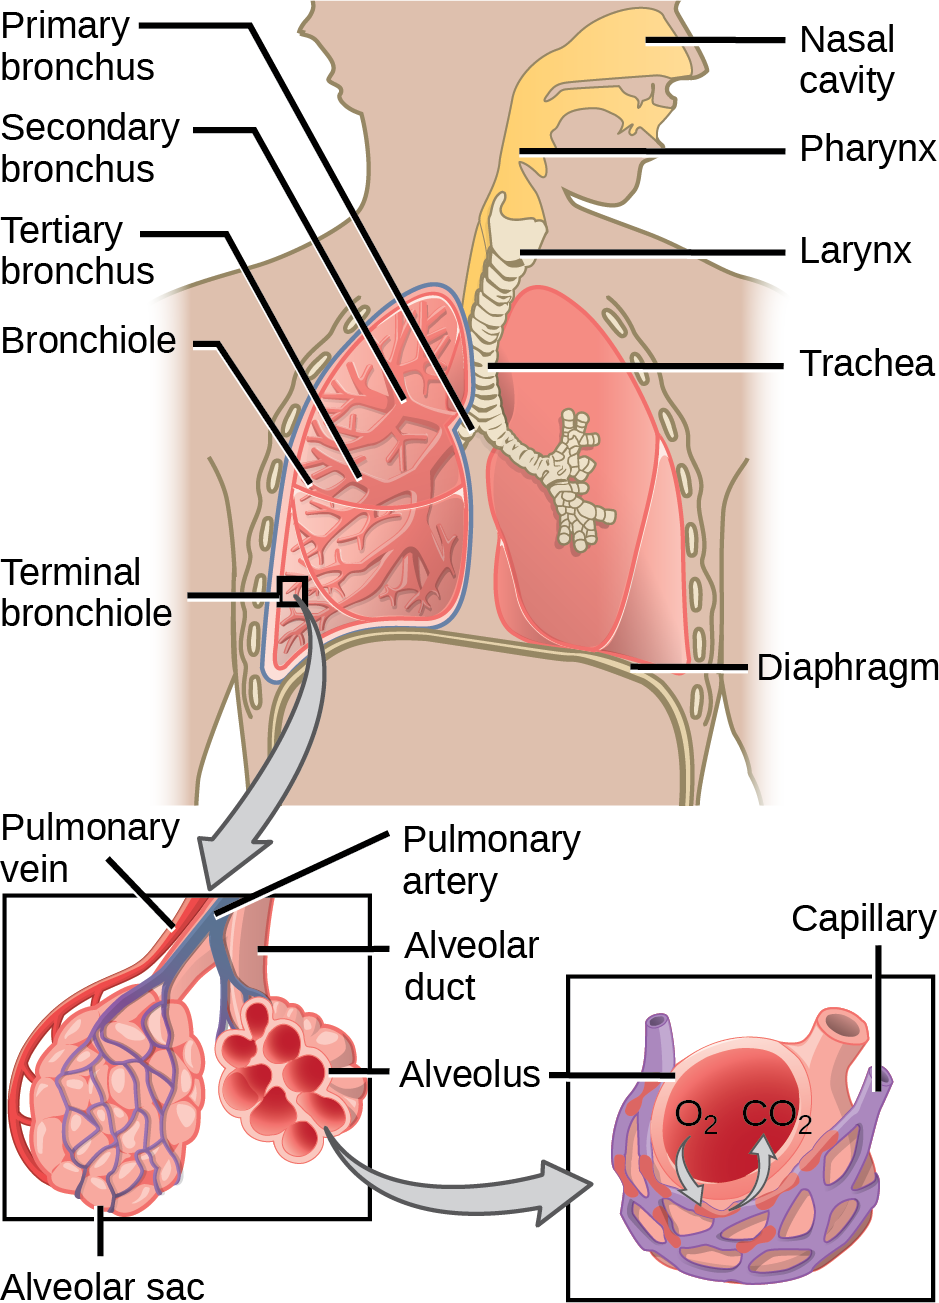 The illustration shows the flow of air through the human respiratory system. The nasal cavity is a wide cavity above and behind the nostrils, and the pharynx is the passageway behind the mouth. The nasal cavity and pharynx join and enter the trachea through the larynx. The larynx is somewhat wider than the trachea and flat. The trachea has concentric, ring-like grooves, giving it a bumpy appearance. The trachea bifurcates into two primary bronchi, which are also grooved. The primary bronchi enter the lungs, and branch into secondary bronchi. The secondary bronchi in turn branch into many tertiary bronchi. The tertiary bronchi branch into bronchioles, which branch into terminal bronchioles. Each terminal bronchiole ends in an alveolar sac. Each alveolar sac contains many alveoli clustered together, like bunches of grapes. The alveolar duct is the air passage into the alveolar sac. The alveoli are hollow, and air empties into them. Pulmonary arteries bring deoxygenated blood to the alveolar sac (and thus appear blue), and pulmonary veins return oxygenated blood (and thus appear red) to the heart. Capillaries form a web around each alveolus. The diaphragm is a membrane that pushes up against the lungs.